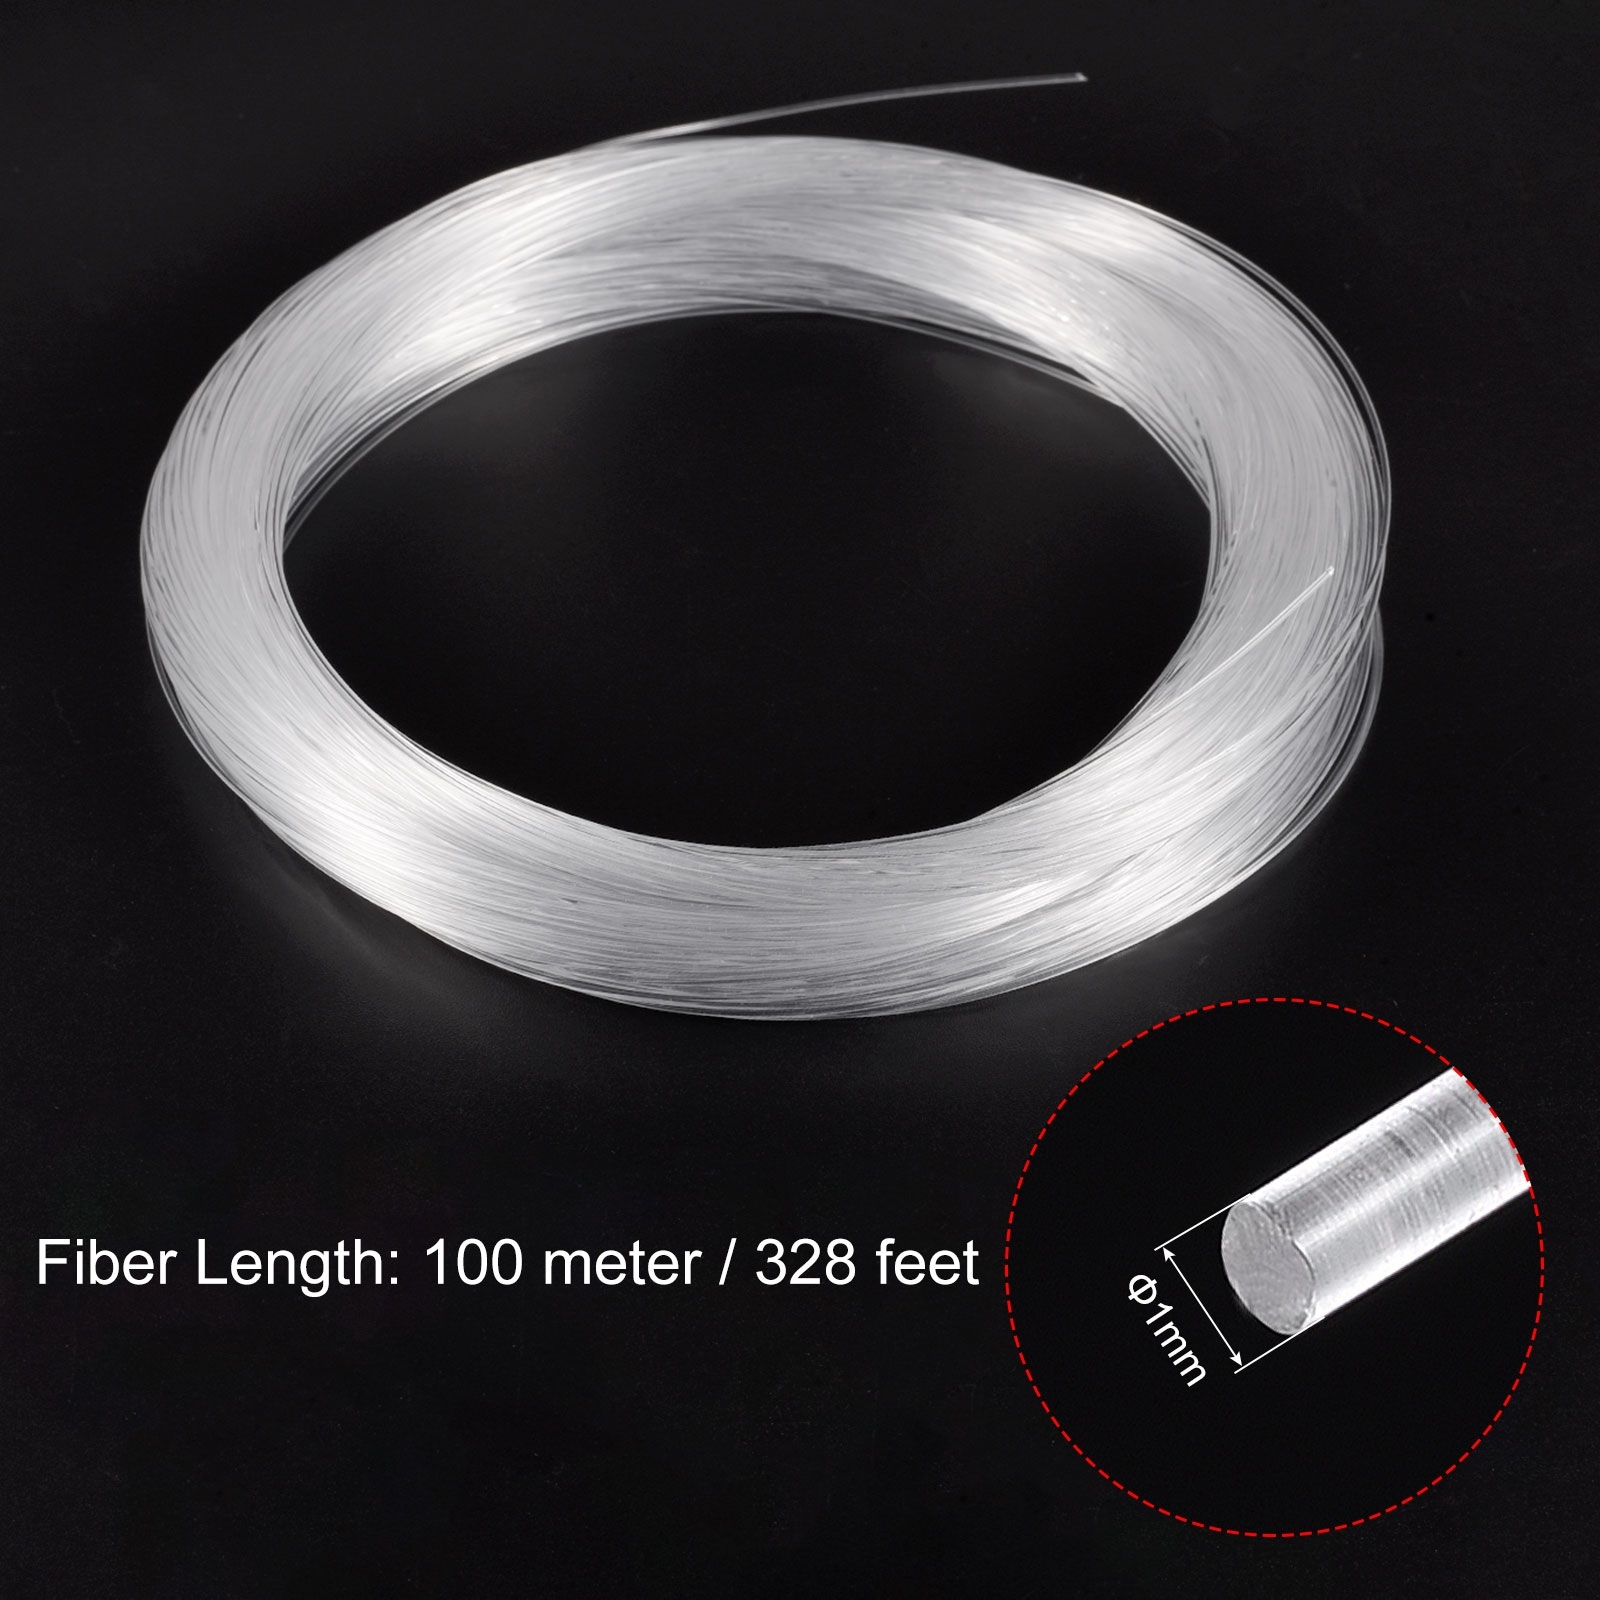 PMMA Side Glow for LED Light Guide in Home, Hotel Fiber Optic Cable